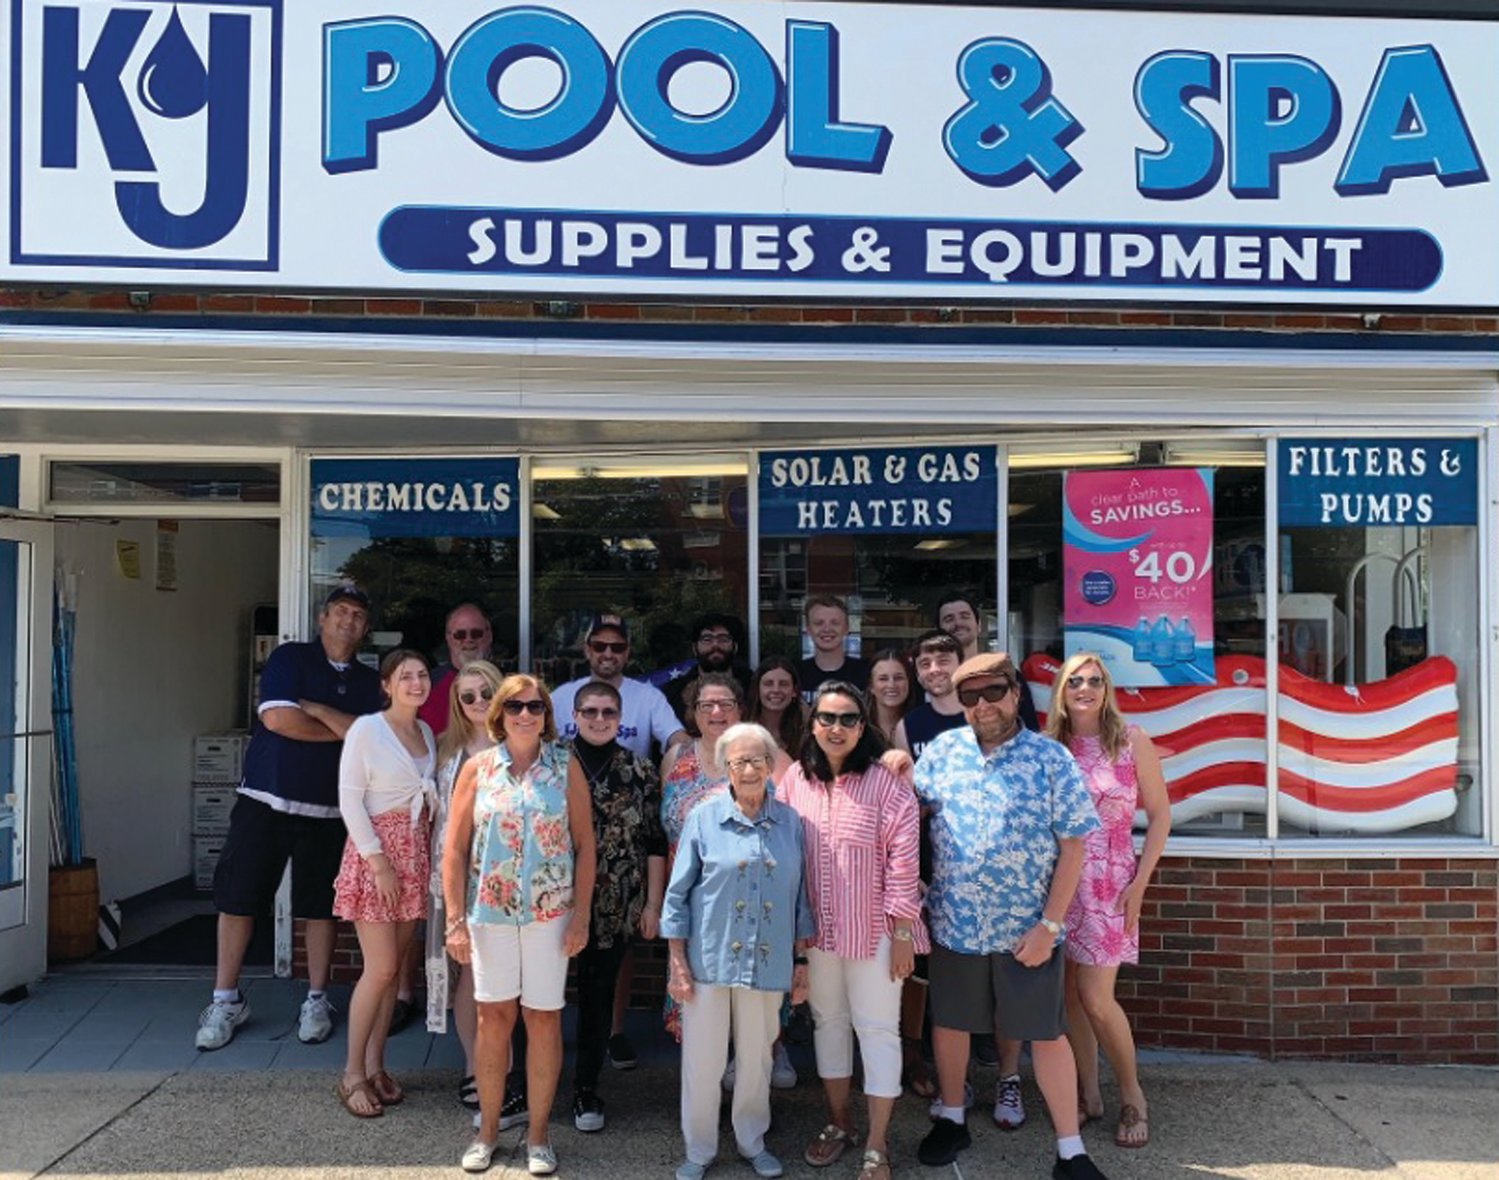 IN THE FAMILY: Maureen Hennessey Hager and her brother-in-law, John Medeiros, have run KJ Pool & Spa on Pontiac Avenue for decades. Here, they are pictured during a gathering of family members at the store over the summer.